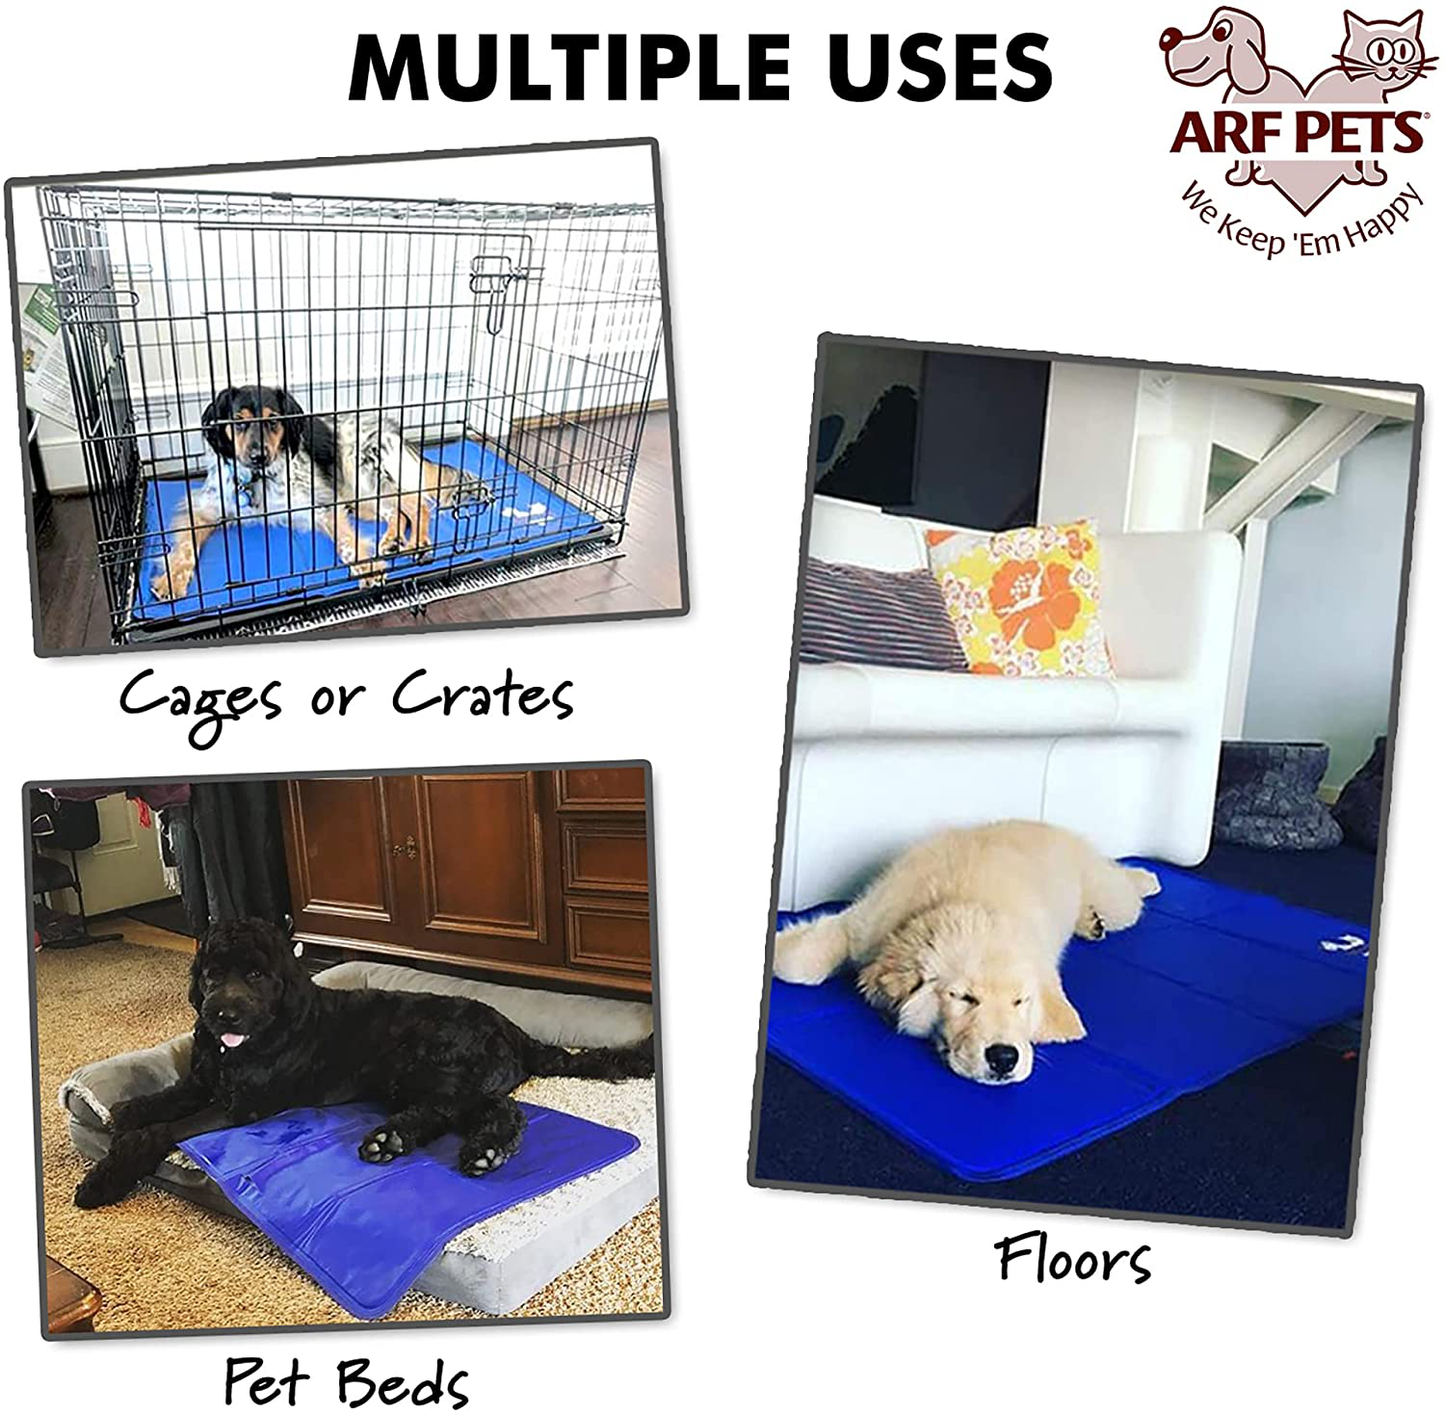 Arf Pets Pet Dog Self Cooling Mat Pad for Kennels, Crates and Beds 23X35